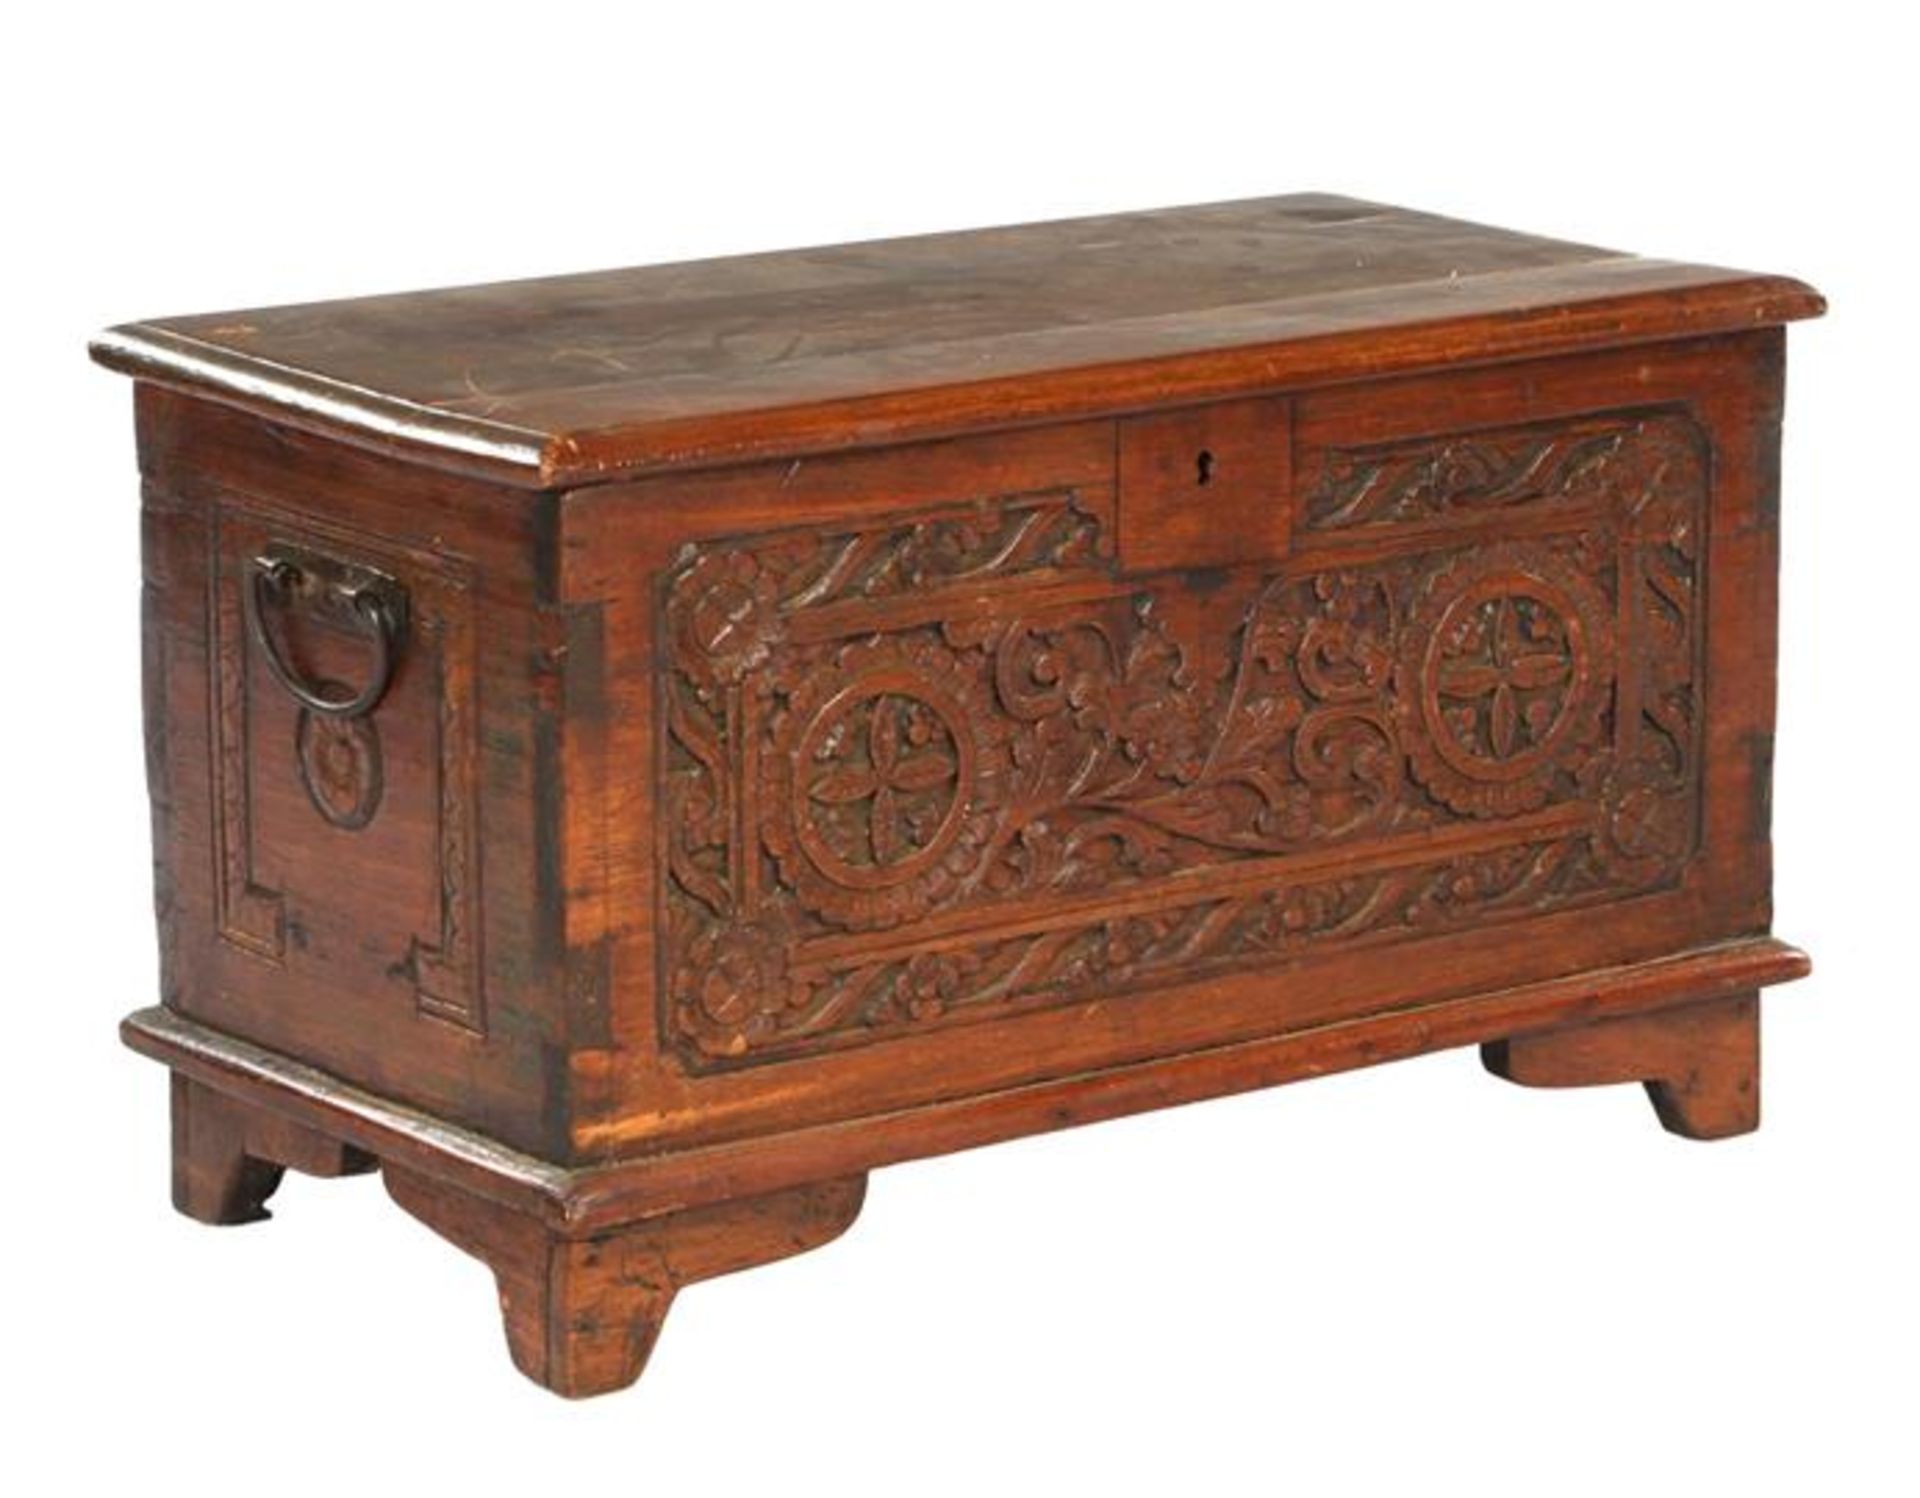 Wooden colonial box with carved decoration, 35 cm high, 65 cm wide, 31 cm deep (flap 2-part)